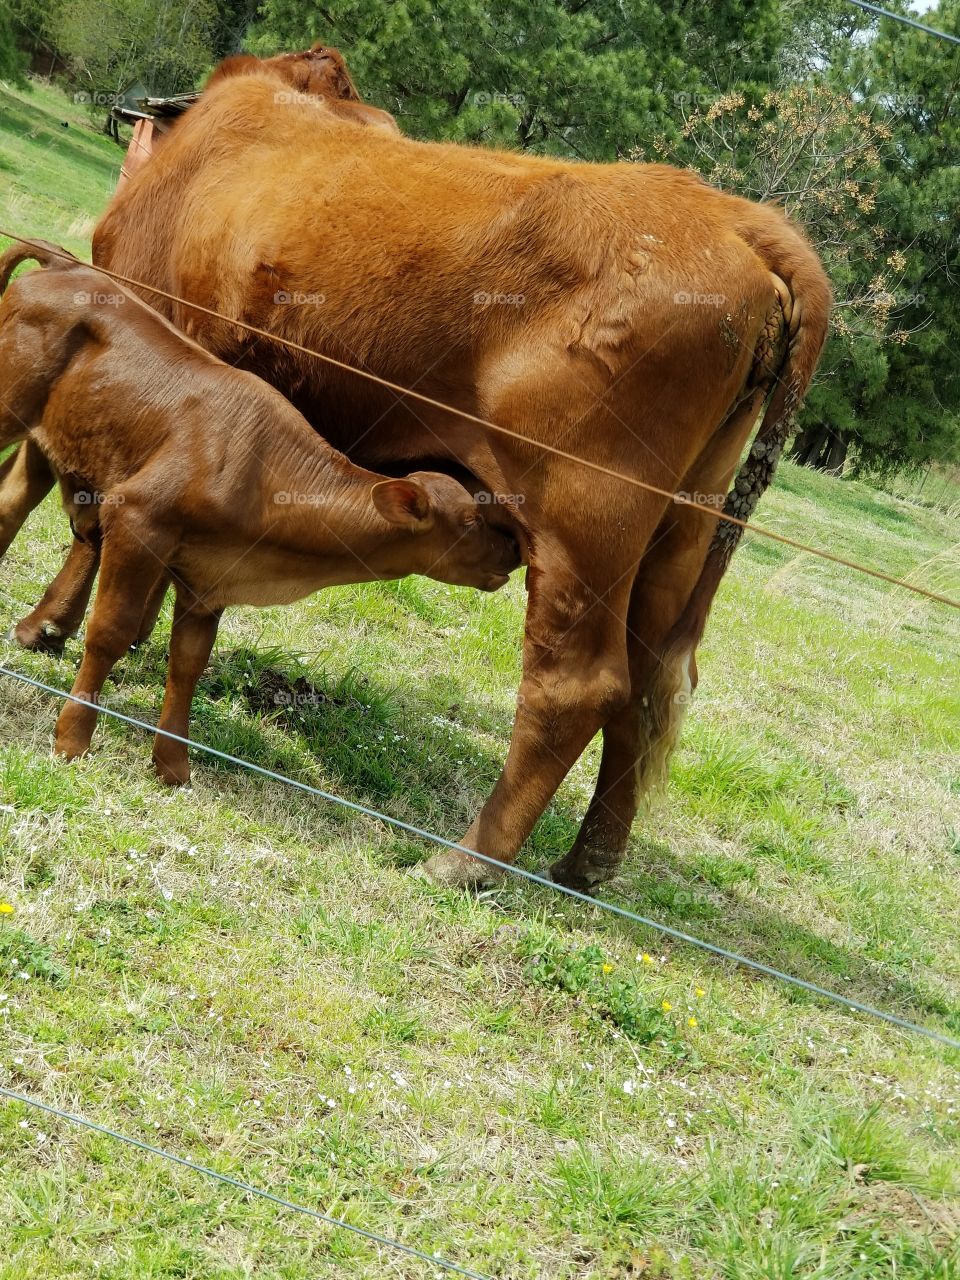 Baby cow drinking milk from mama.